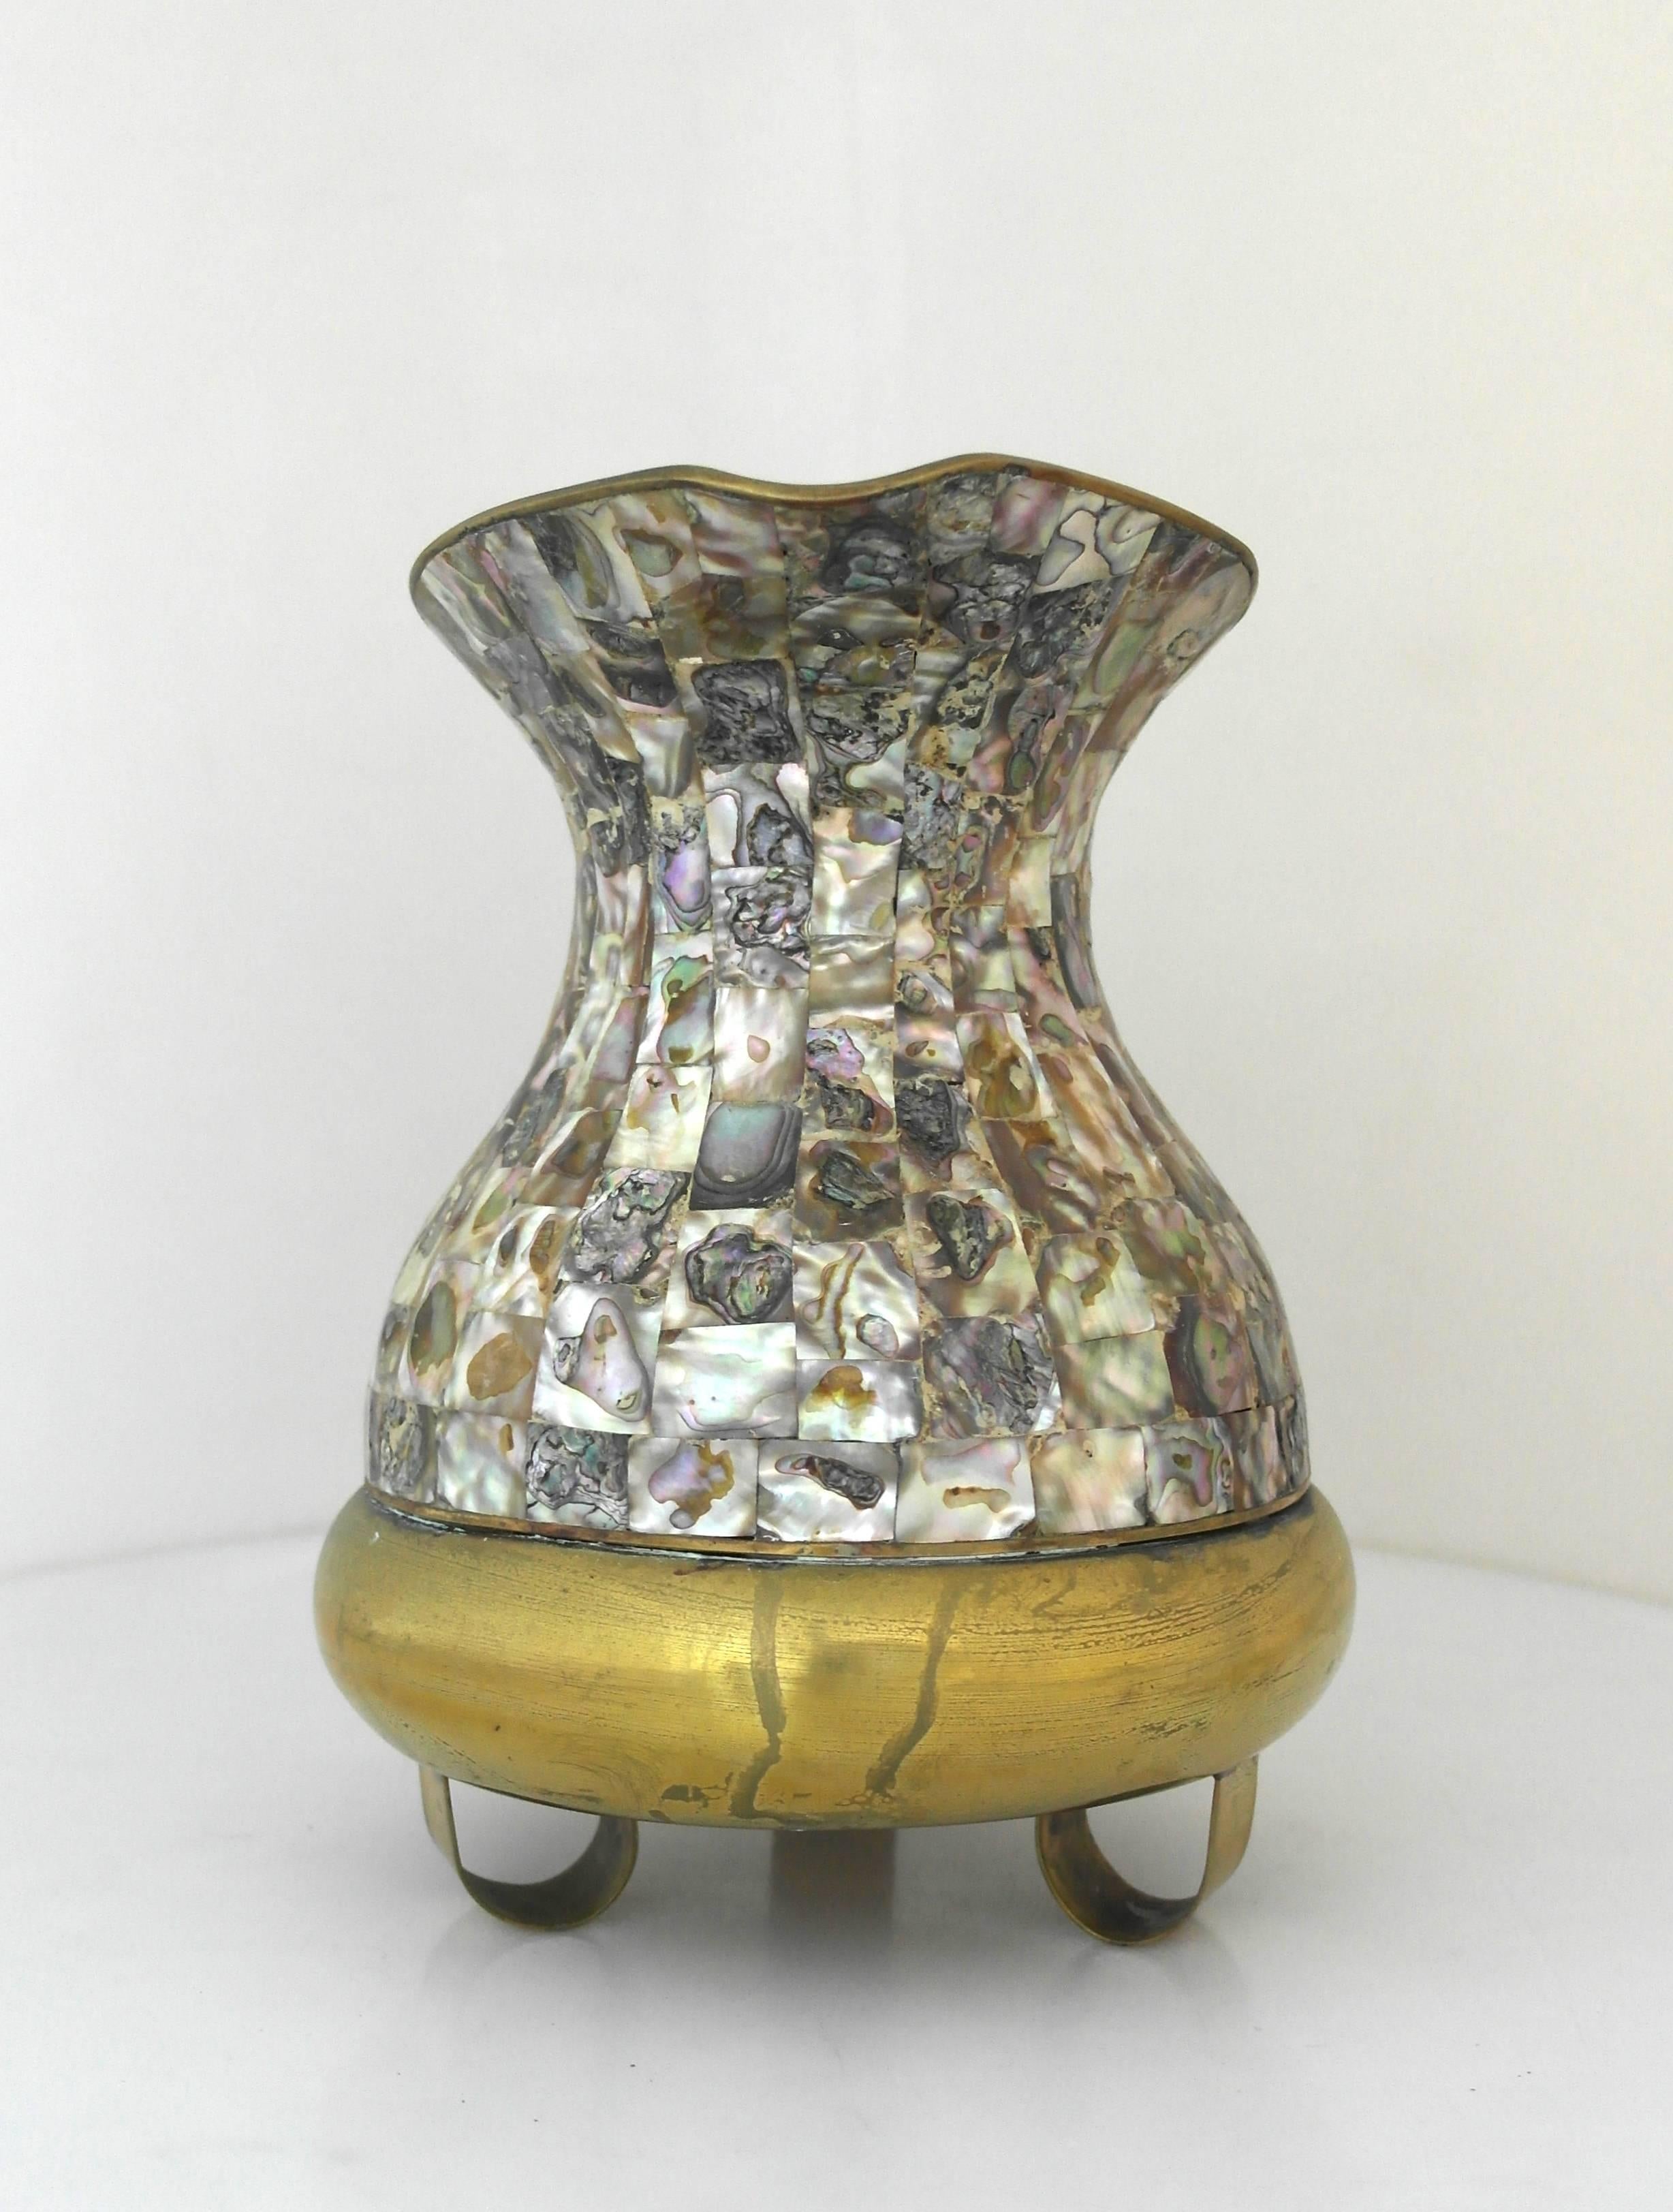 Being offered is a circa 1950 brass pitcher made in Mexico. Handmade brass object with panels of abalone inlay on the body and handle; resting on three curved feet. Dimensions: 9 1/4" tall x 6 1/4" diameter x 9" from handle to spout.